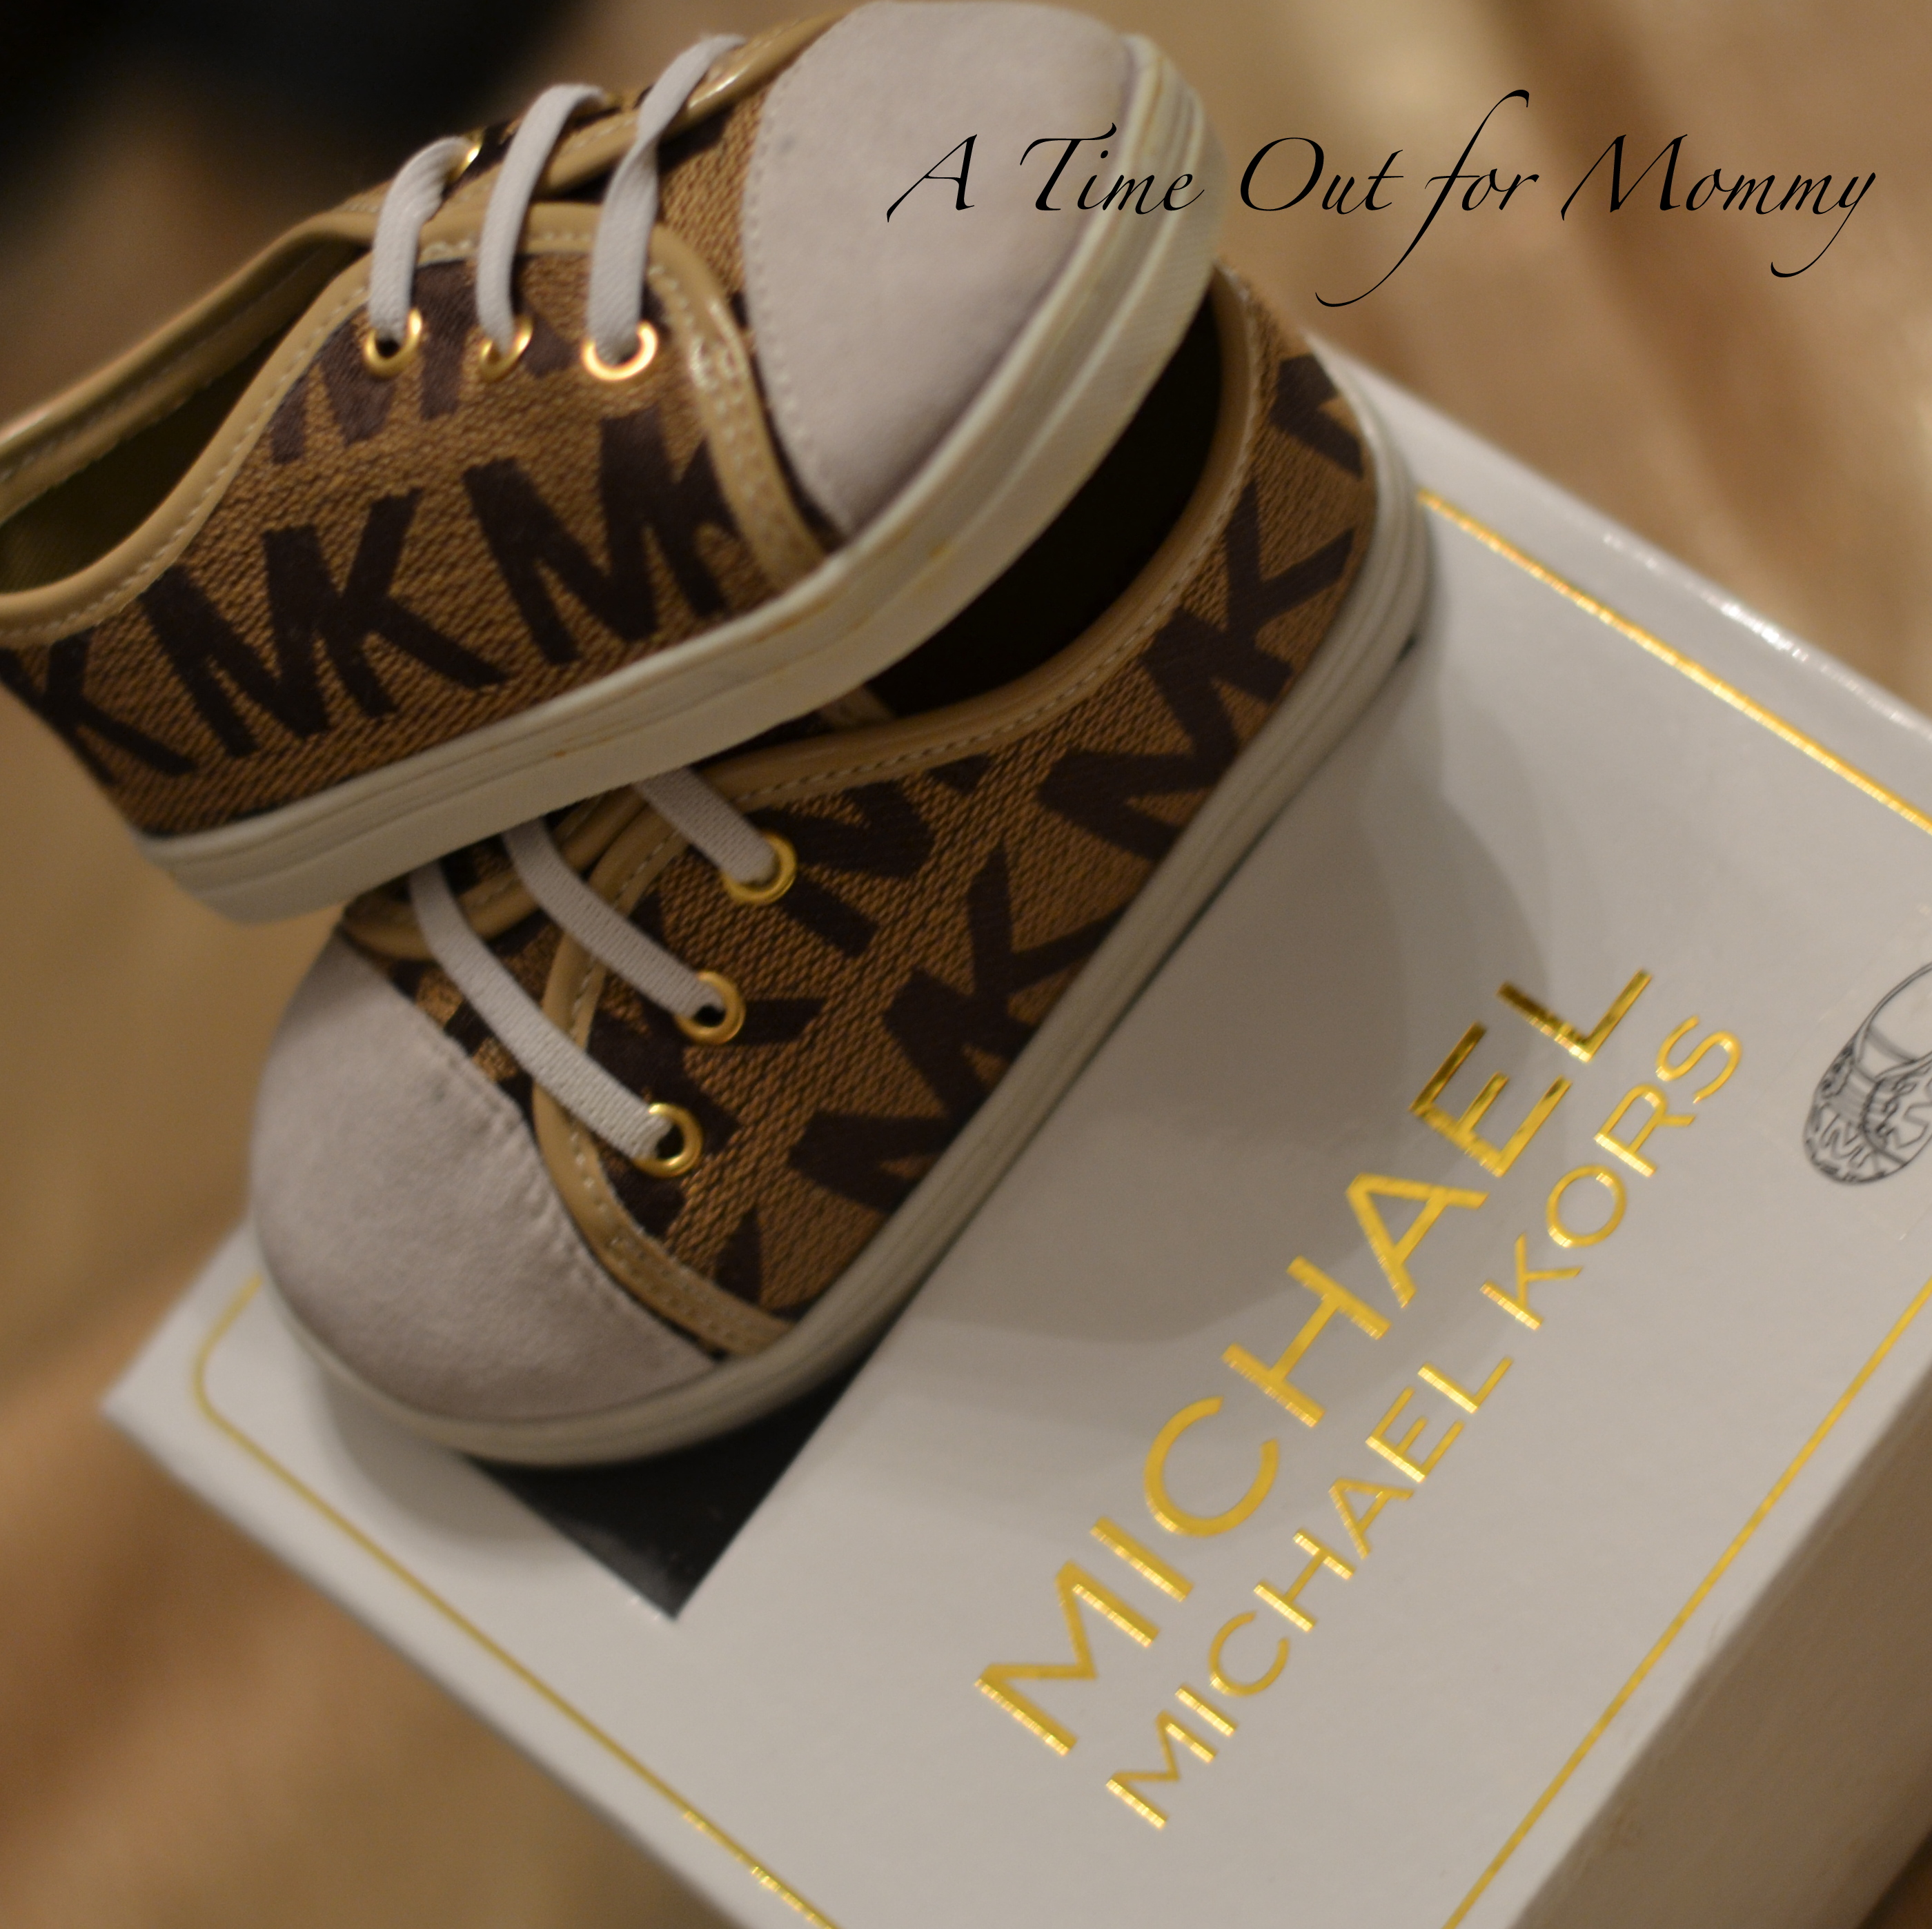 Michael Kors Baby Ivy Sneak! - A Time Out for Mommy